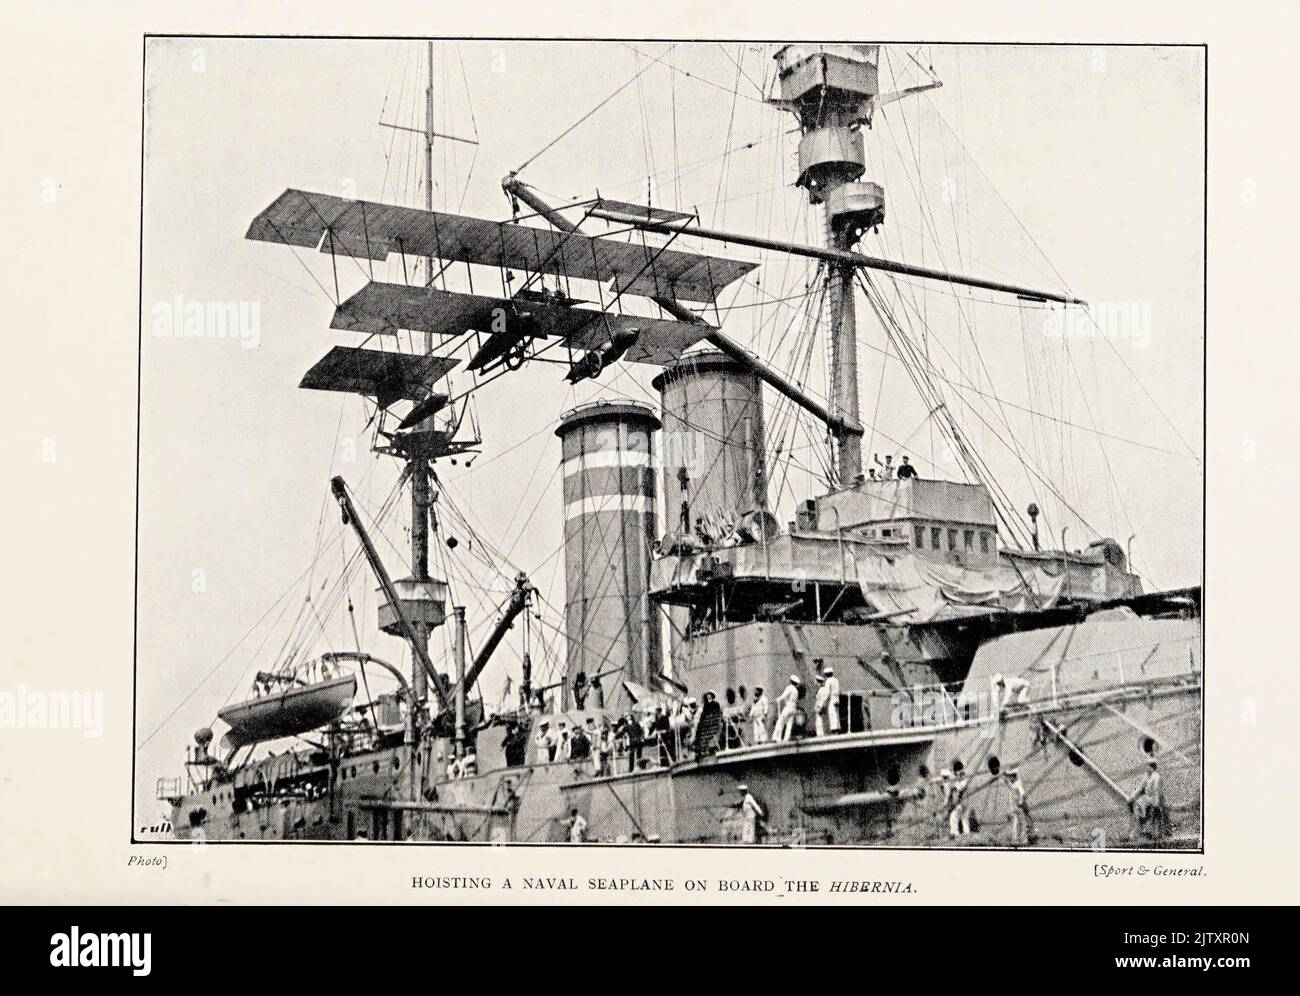 HOISTING A NAVAL SEAPLANE ON BOARD THE HMS HIBERNIA from the book ' The British battle fleet : its inception and growth throughout the centuries to the present day ' Volume 2 by Jane, Fred T., 1865-1916 Publication date 1915 Stock Photo